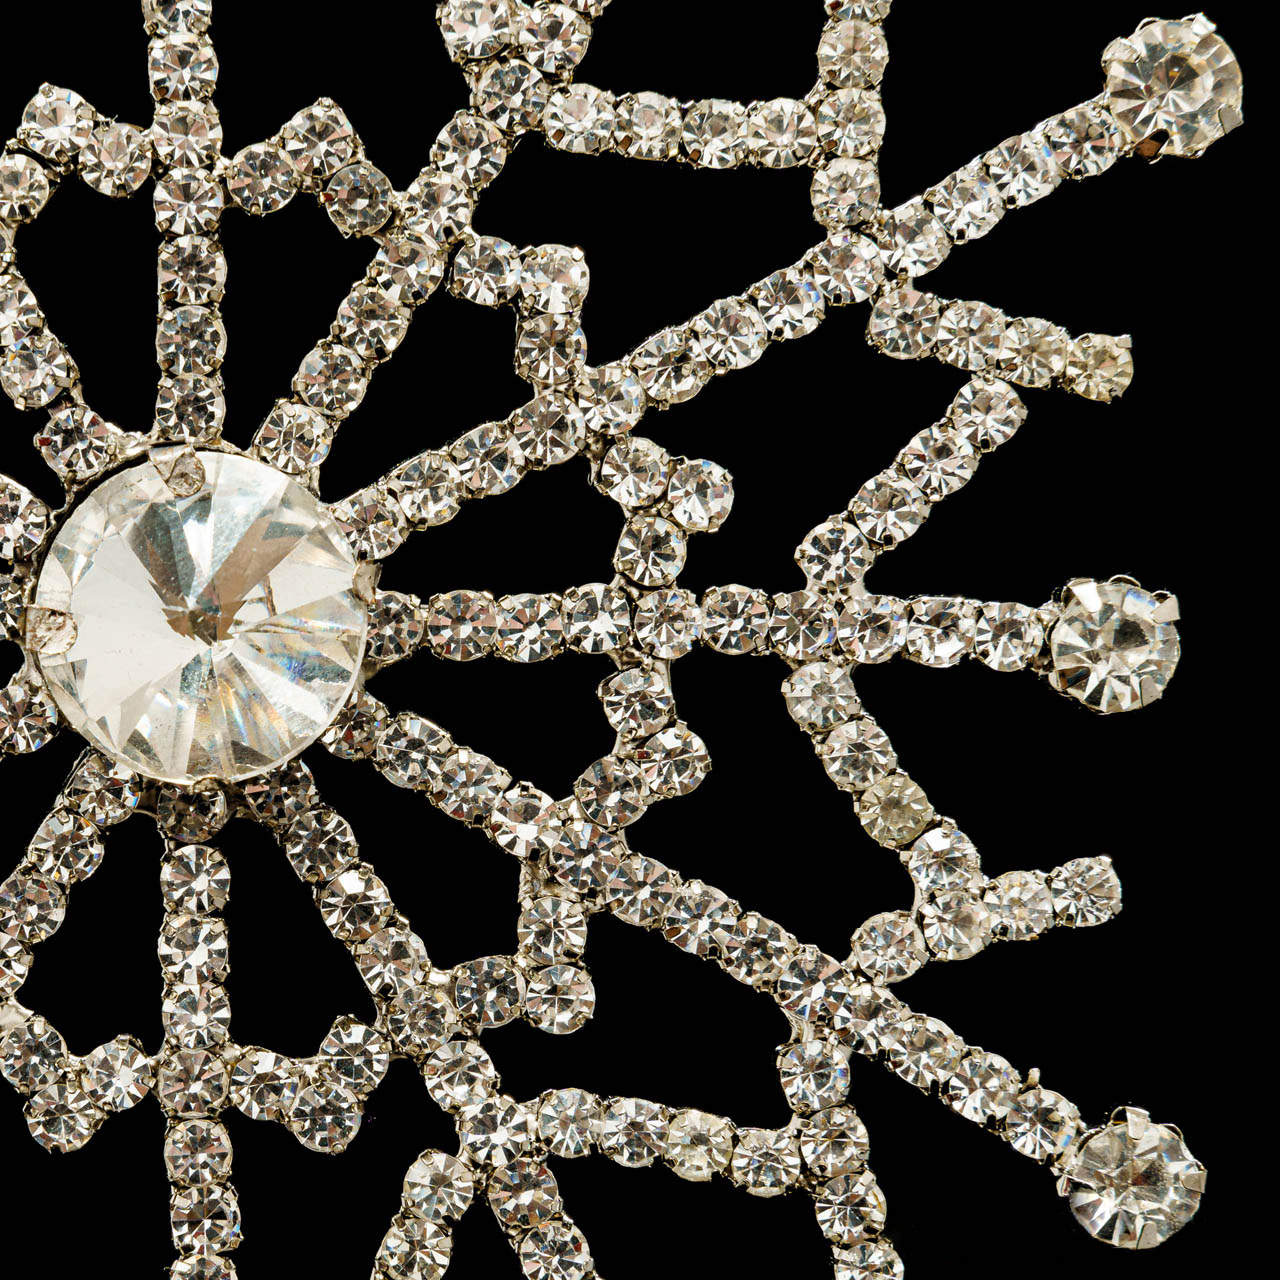 Gleam is a Christmas ornament of metal and rhinestones inspired by 1950's modernism